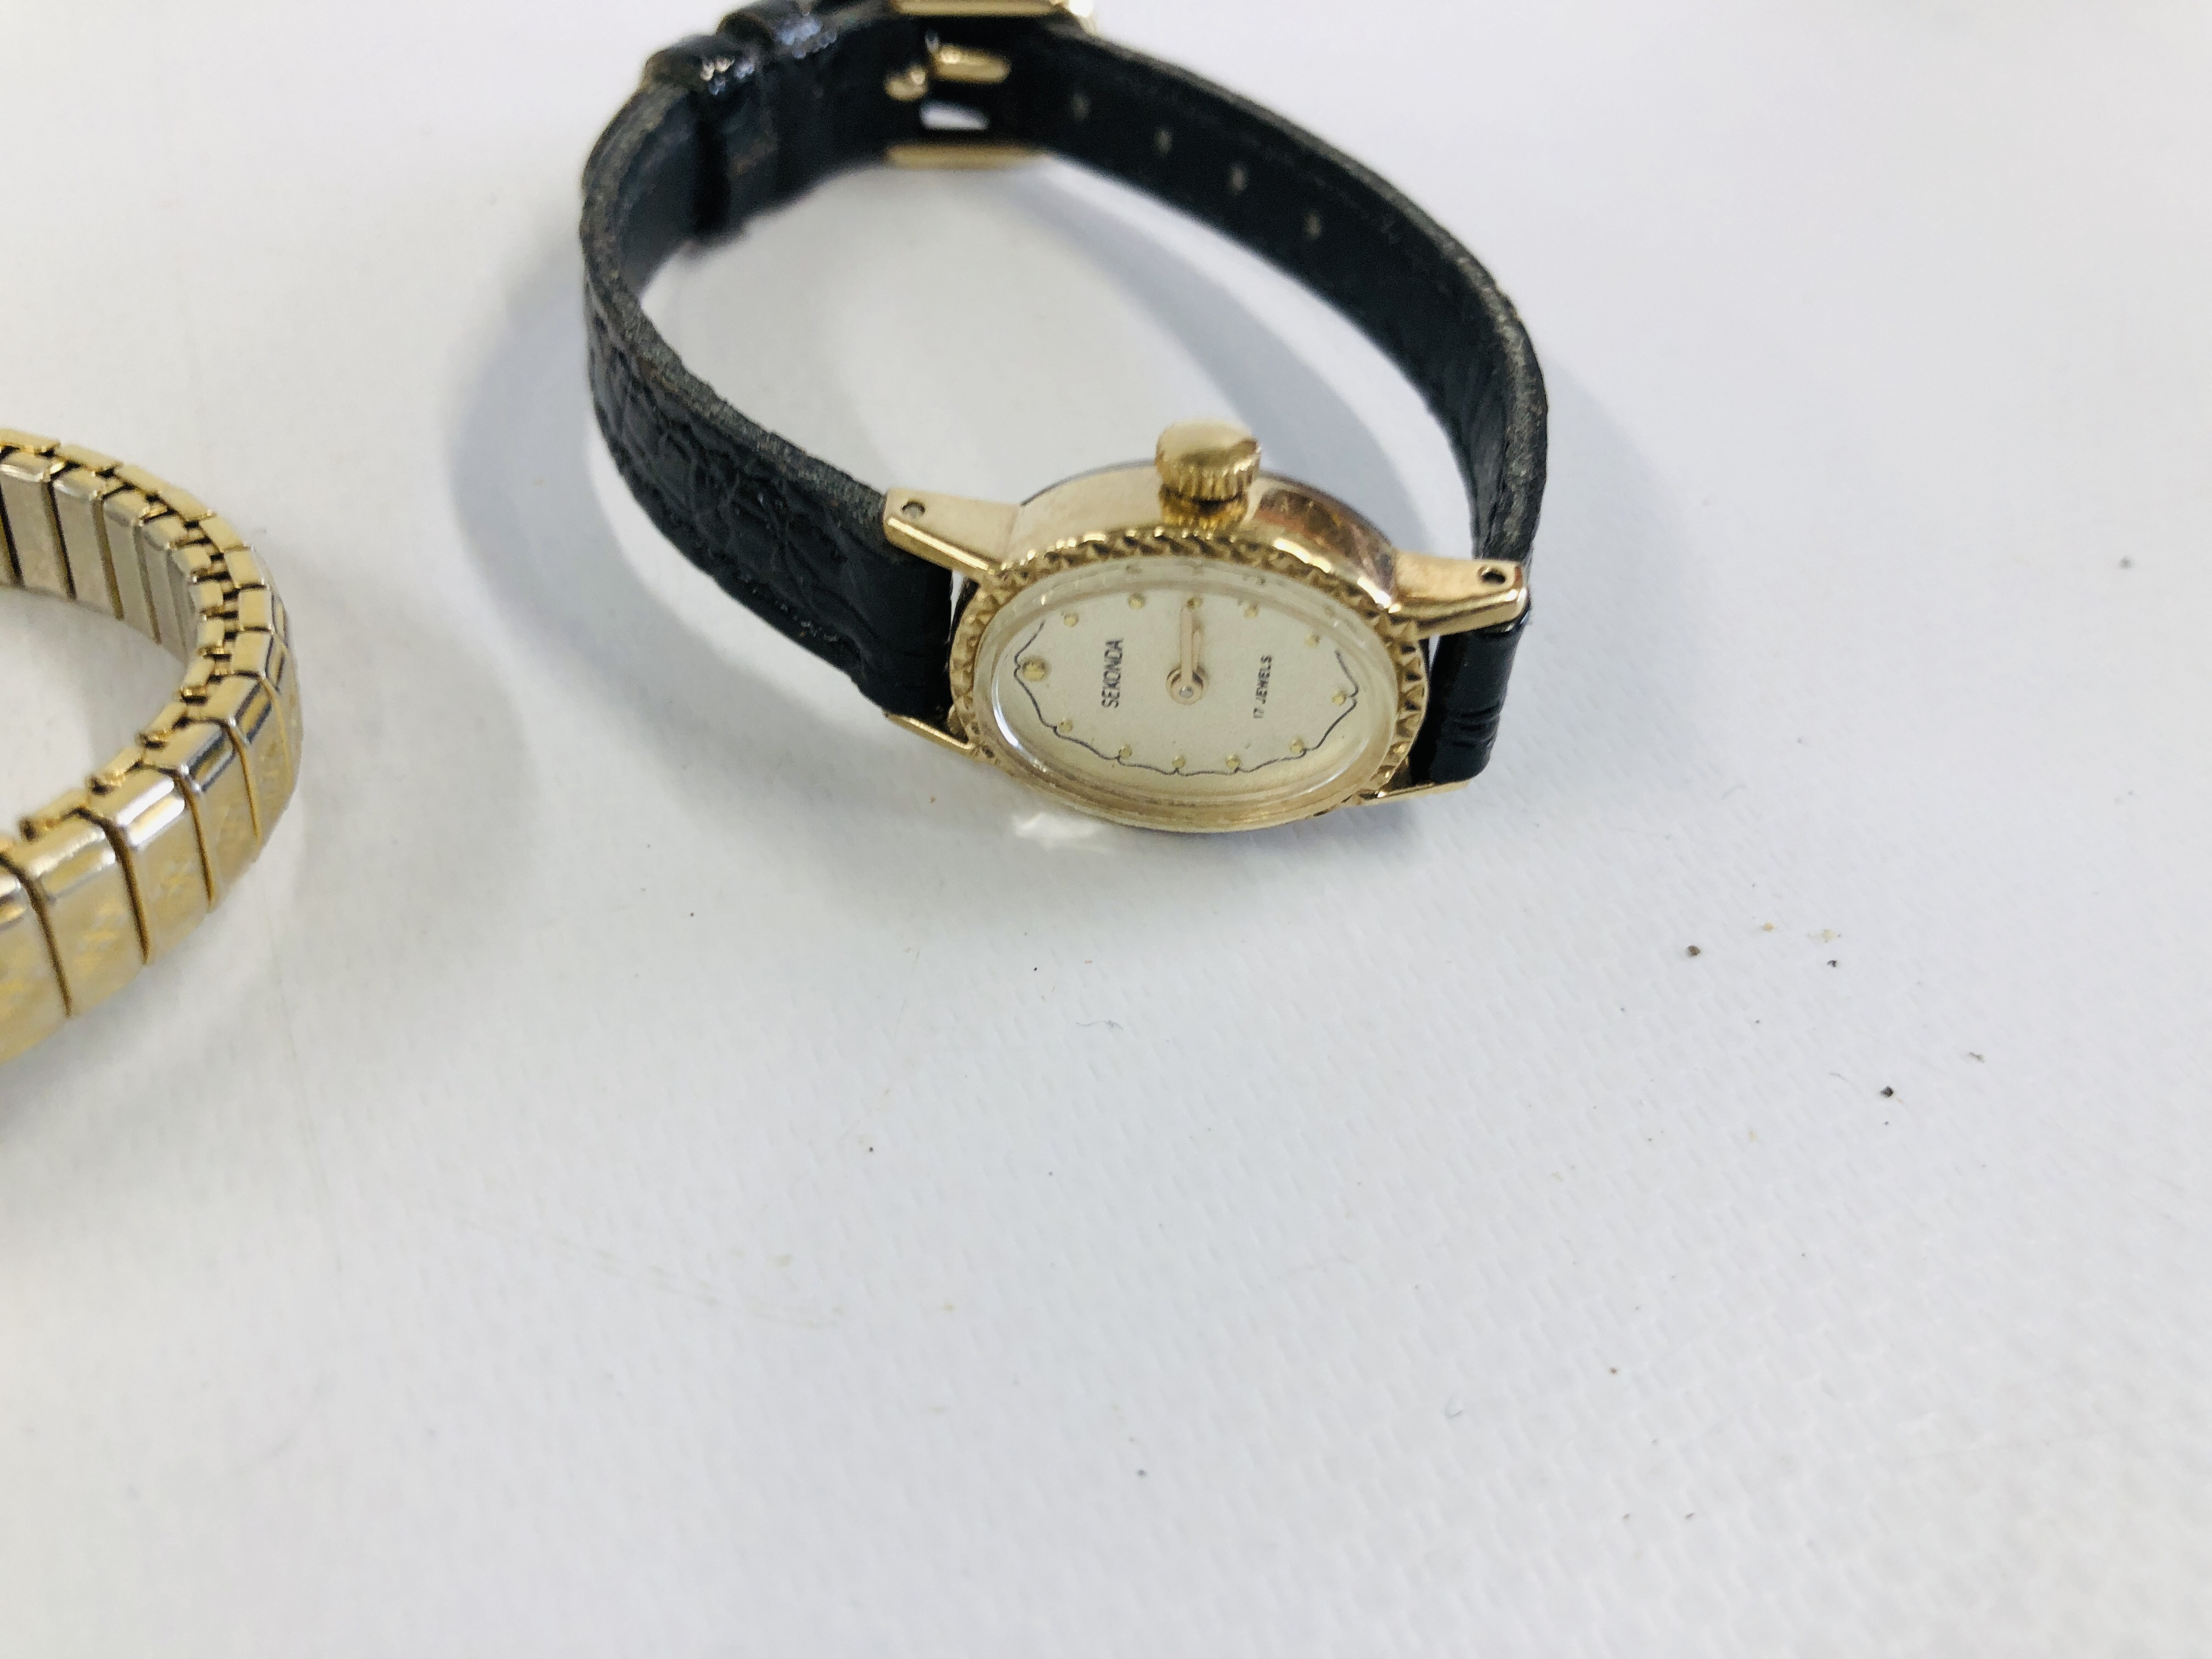 SELECTION OF 7 VINTAGE LADIES HAND WIND WRIST WATCHES TO INCLUDE SEKONDA, AVIA ETC. - Image 8 of 10